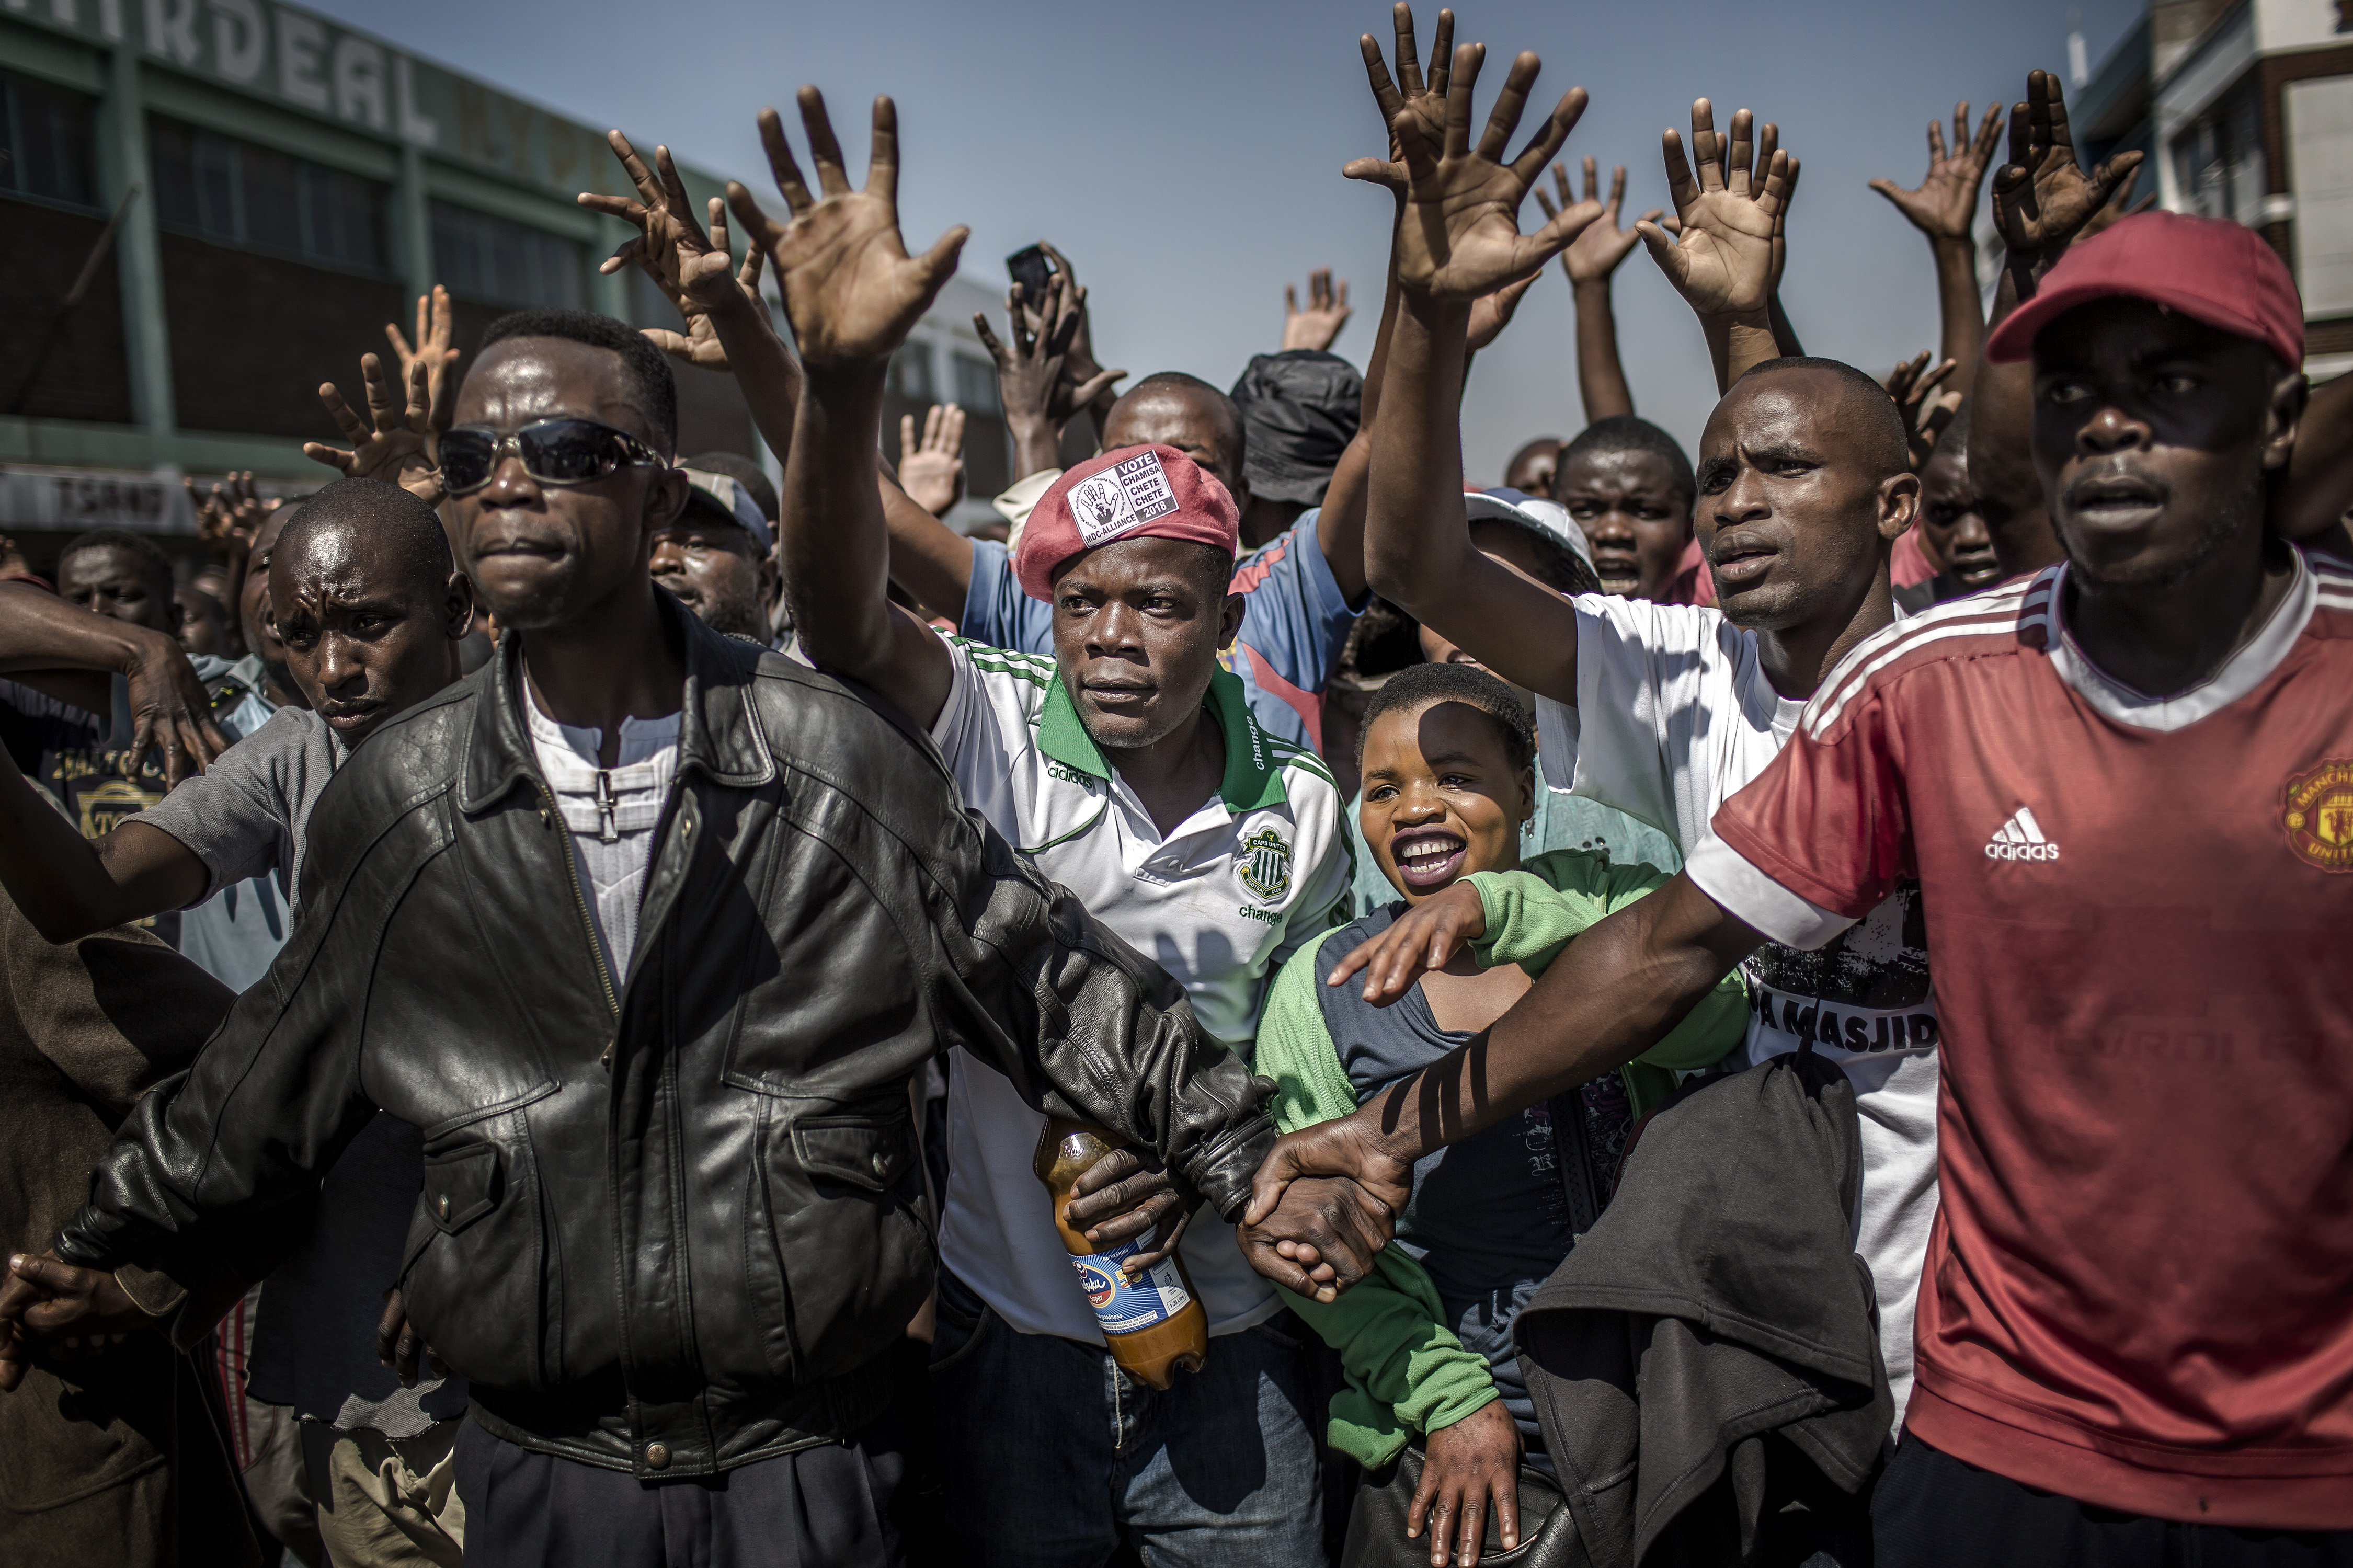 Supporters of the opposition party Movement for Democratic Change (MDC), protest against alleged election fraud in Harare, Zimbabwe on Aug. 1, 2018. (Luis Tato—AFP/Getty Images)